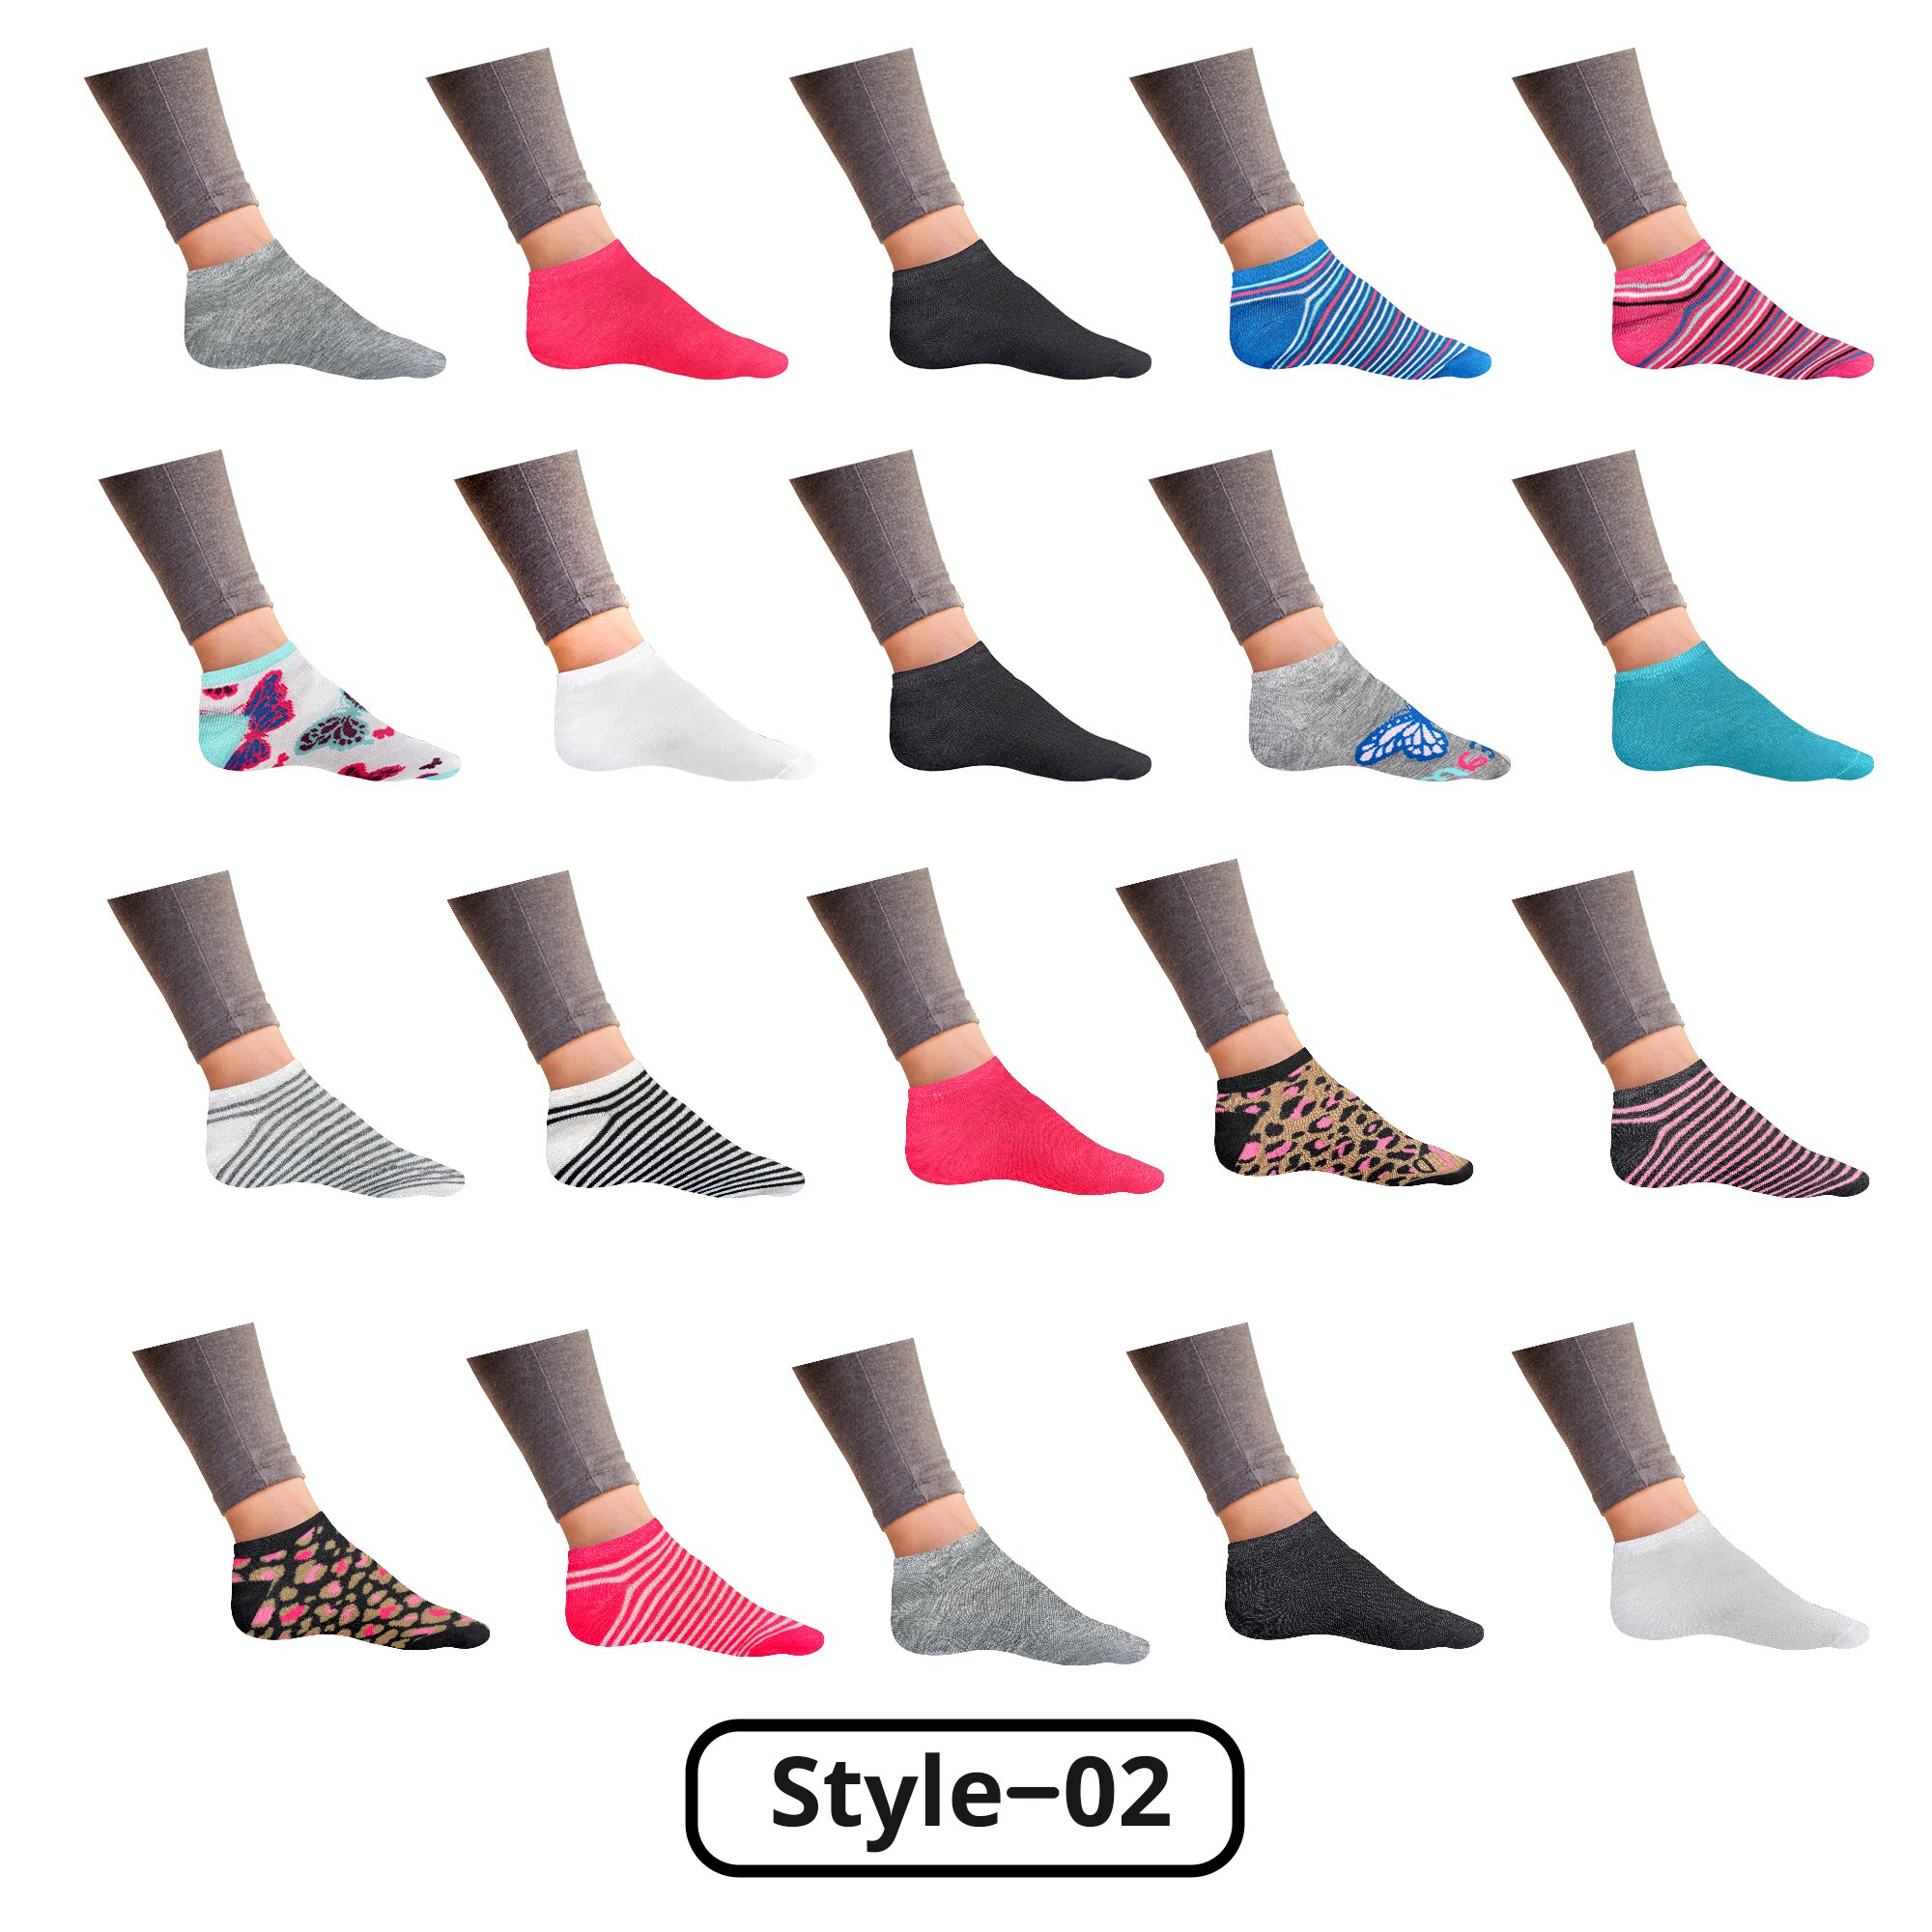 20-Pairs: Women’s Breathable Stylish Colorful Fun No Show Low Cut Ankle Socks - Style 5